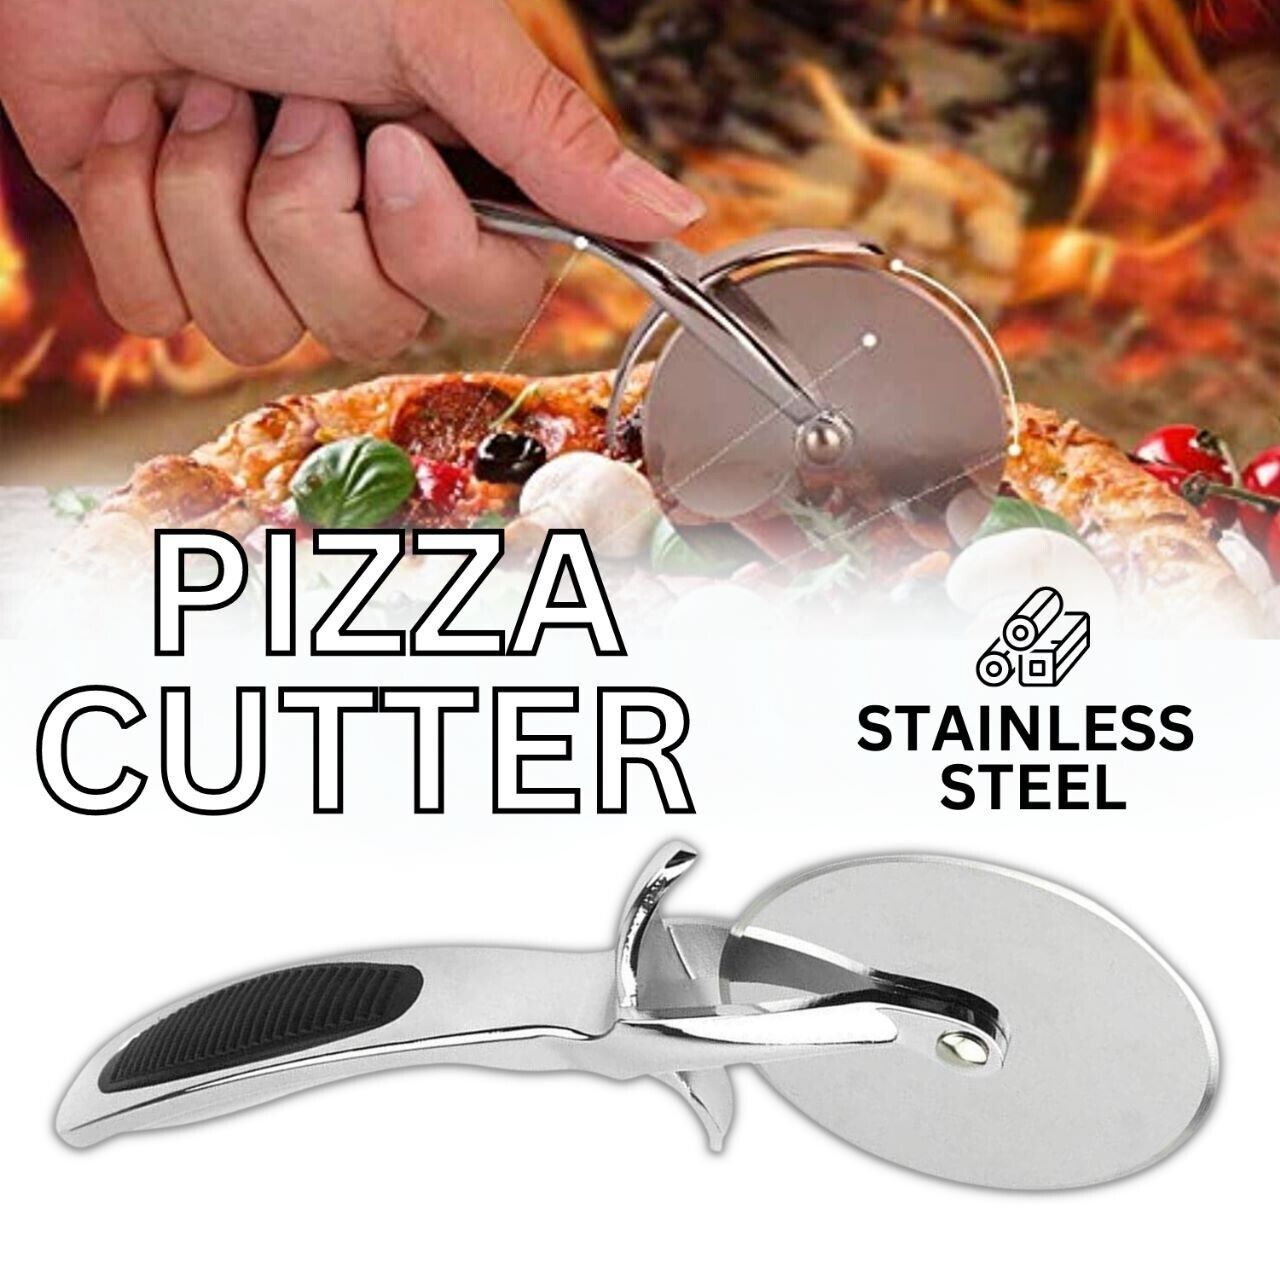 Pizza Cutter Wheel Kitchen Pizza Slicer Cutting Tool